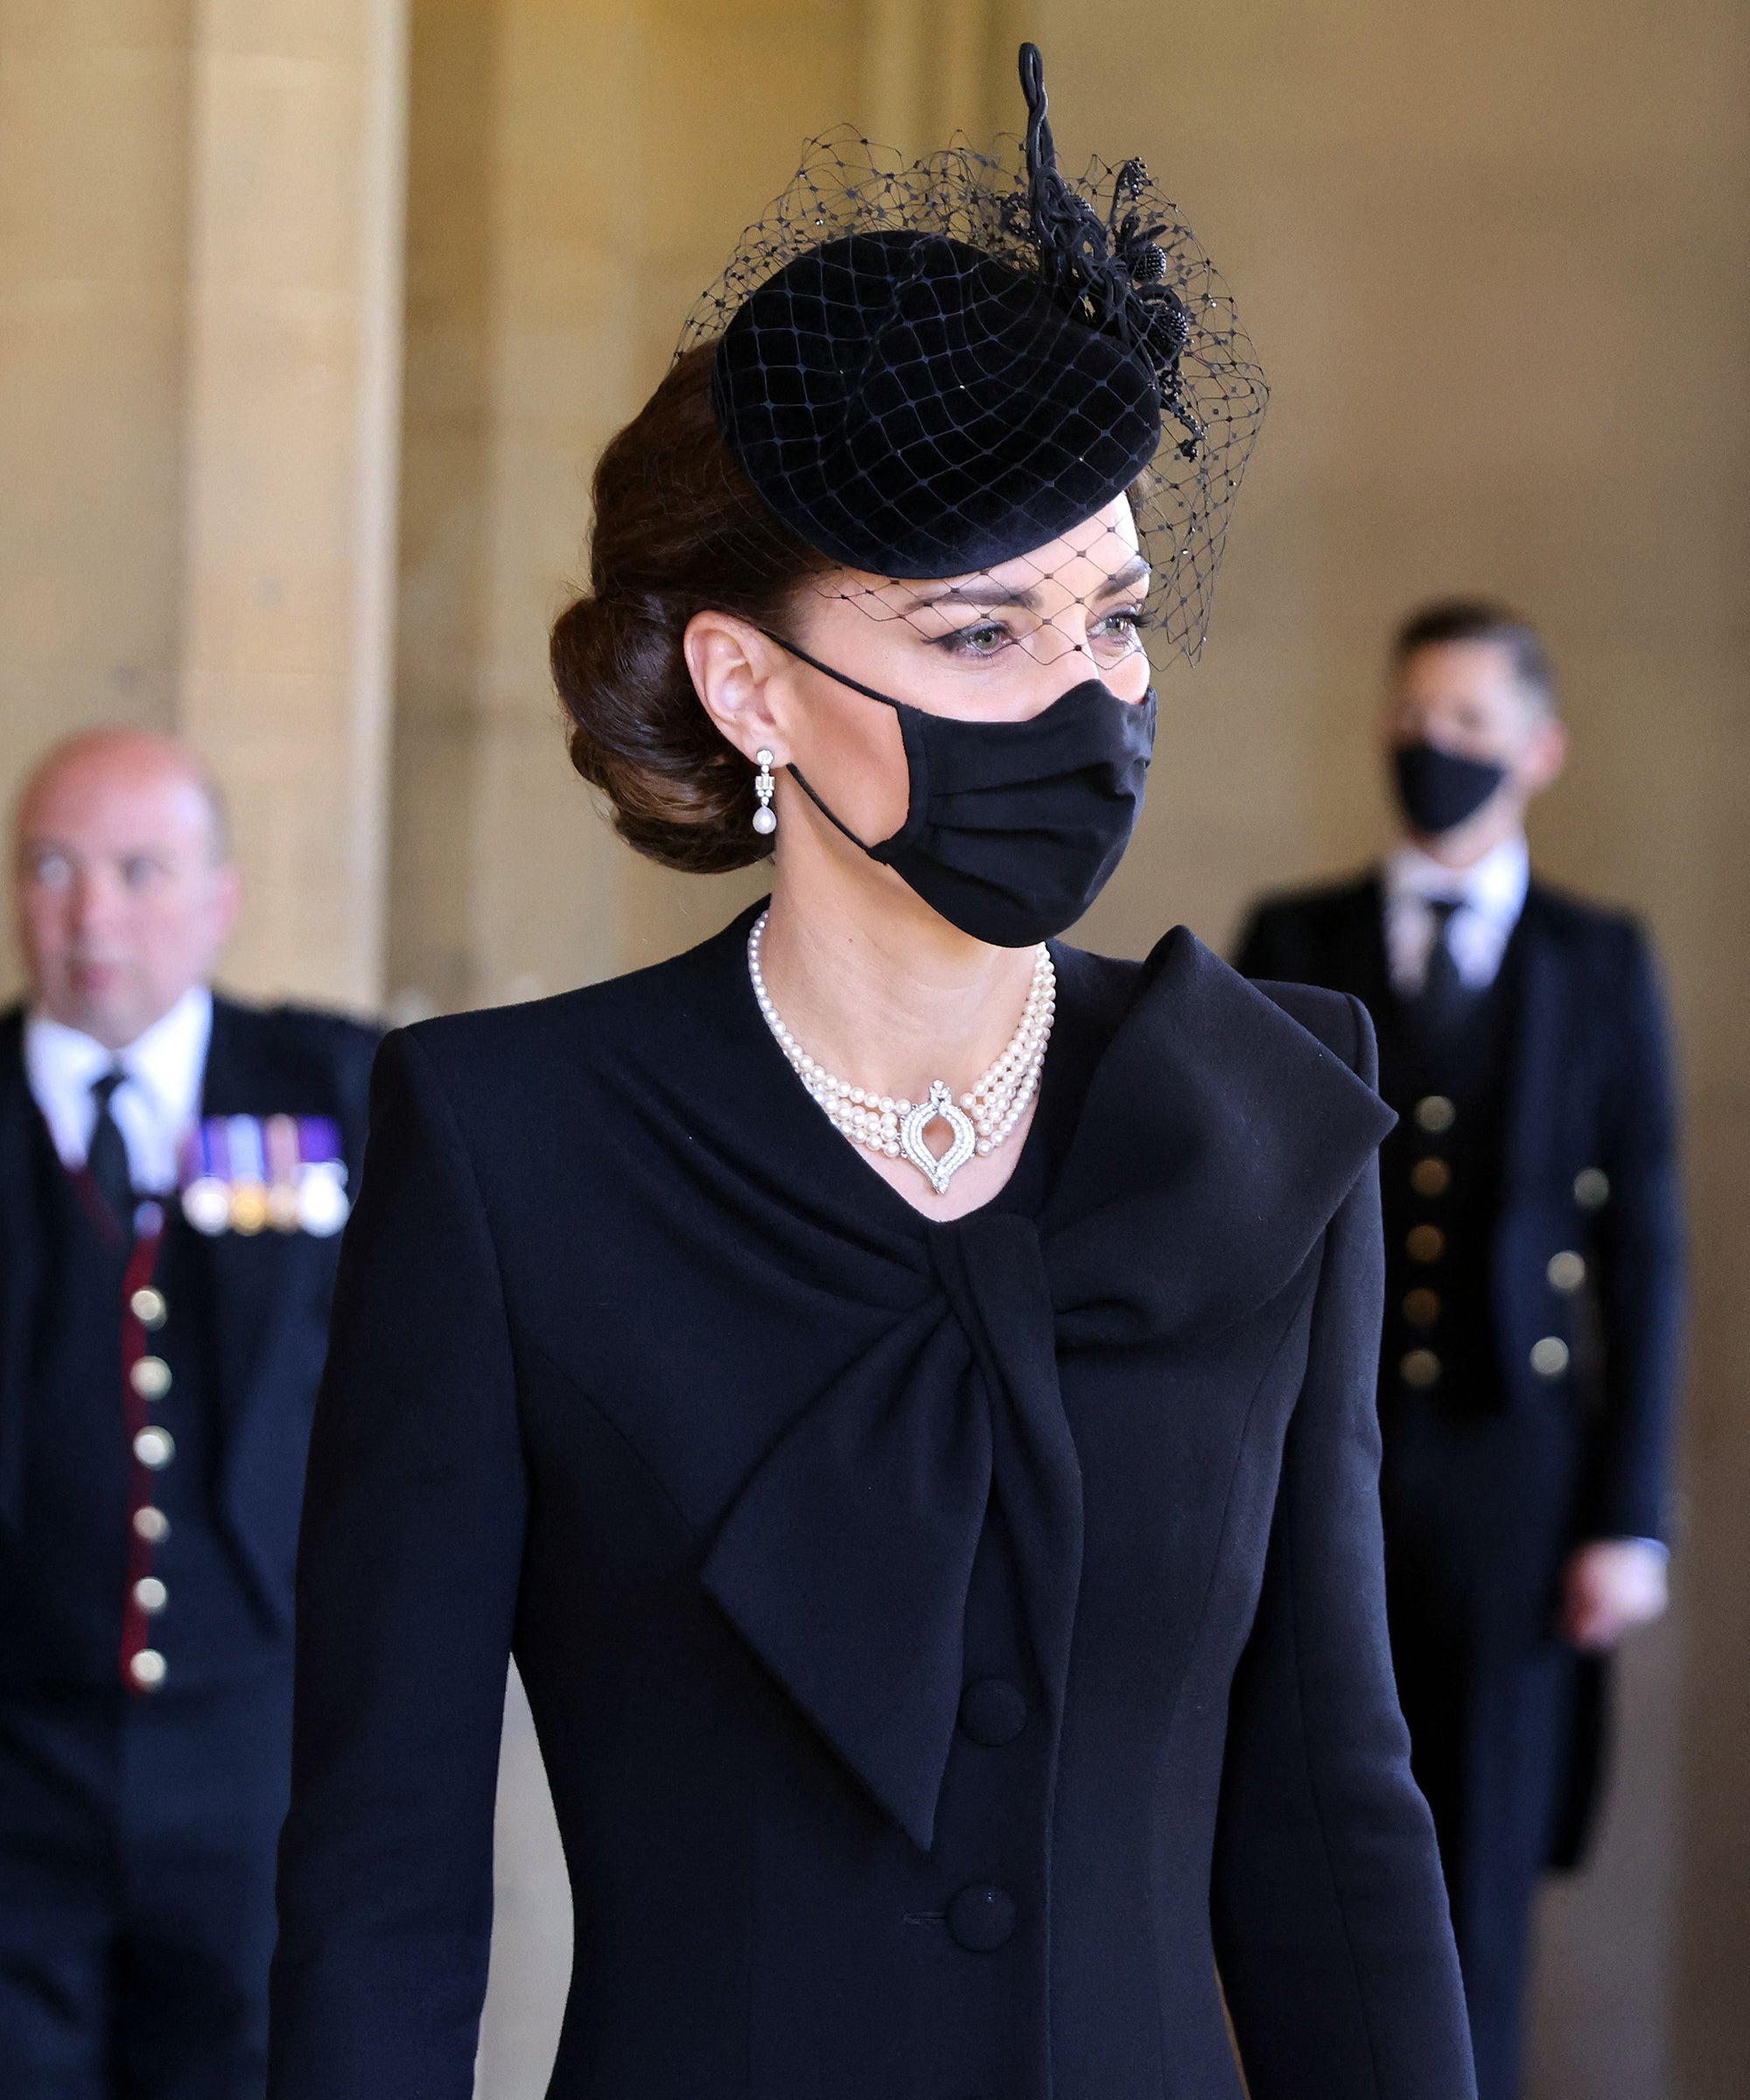 Kate Middleton’s Jewelry At Prince Philip’s Funeral Honored The Queen & Princess Diana